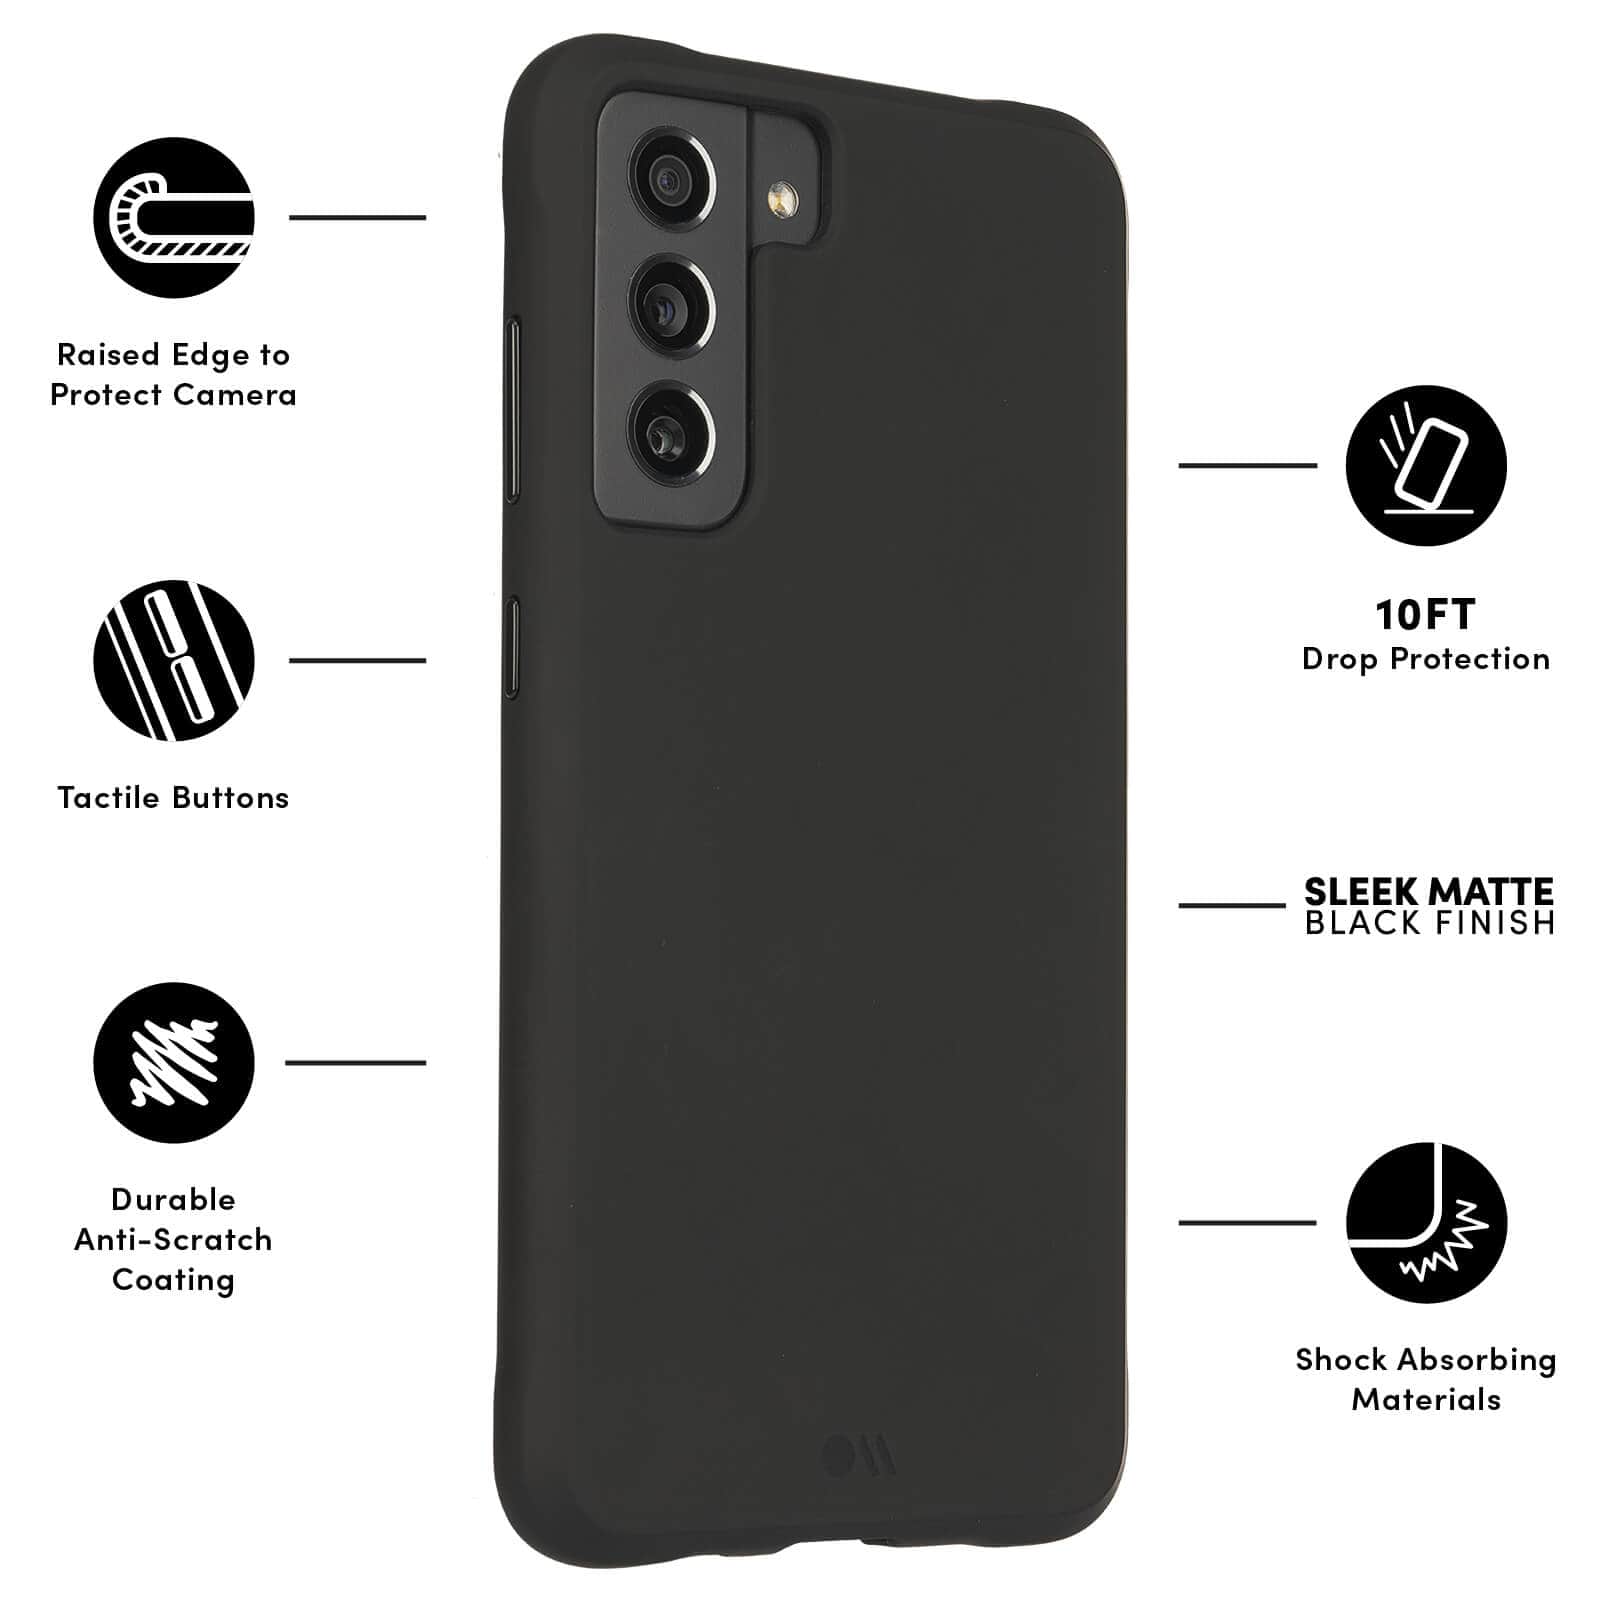 FEATURES: RAISED EDGE TO PROTECT CAMERA, TACTILE BUTTONS, DURABLE ANTI-SCRATCH COATING, 10FT DROP PROTECTION, SLEEK MATTE FINISH, SHOCK ABSORBING MATERIALS. COLOR::BLACK